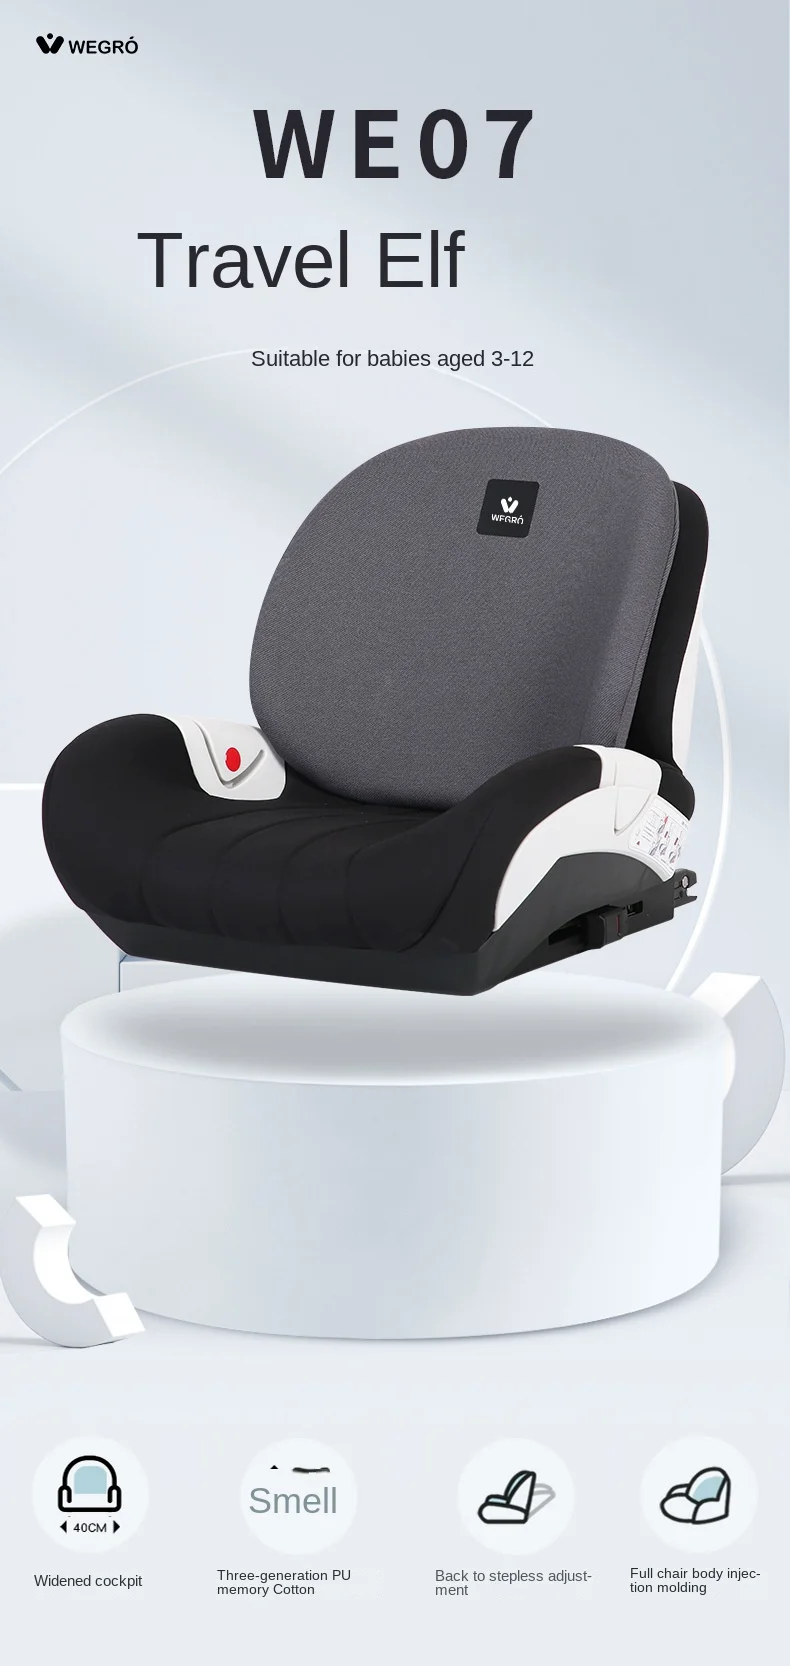 Child Safety Seat: Car Mounted Booster Pad for Ages 3-12